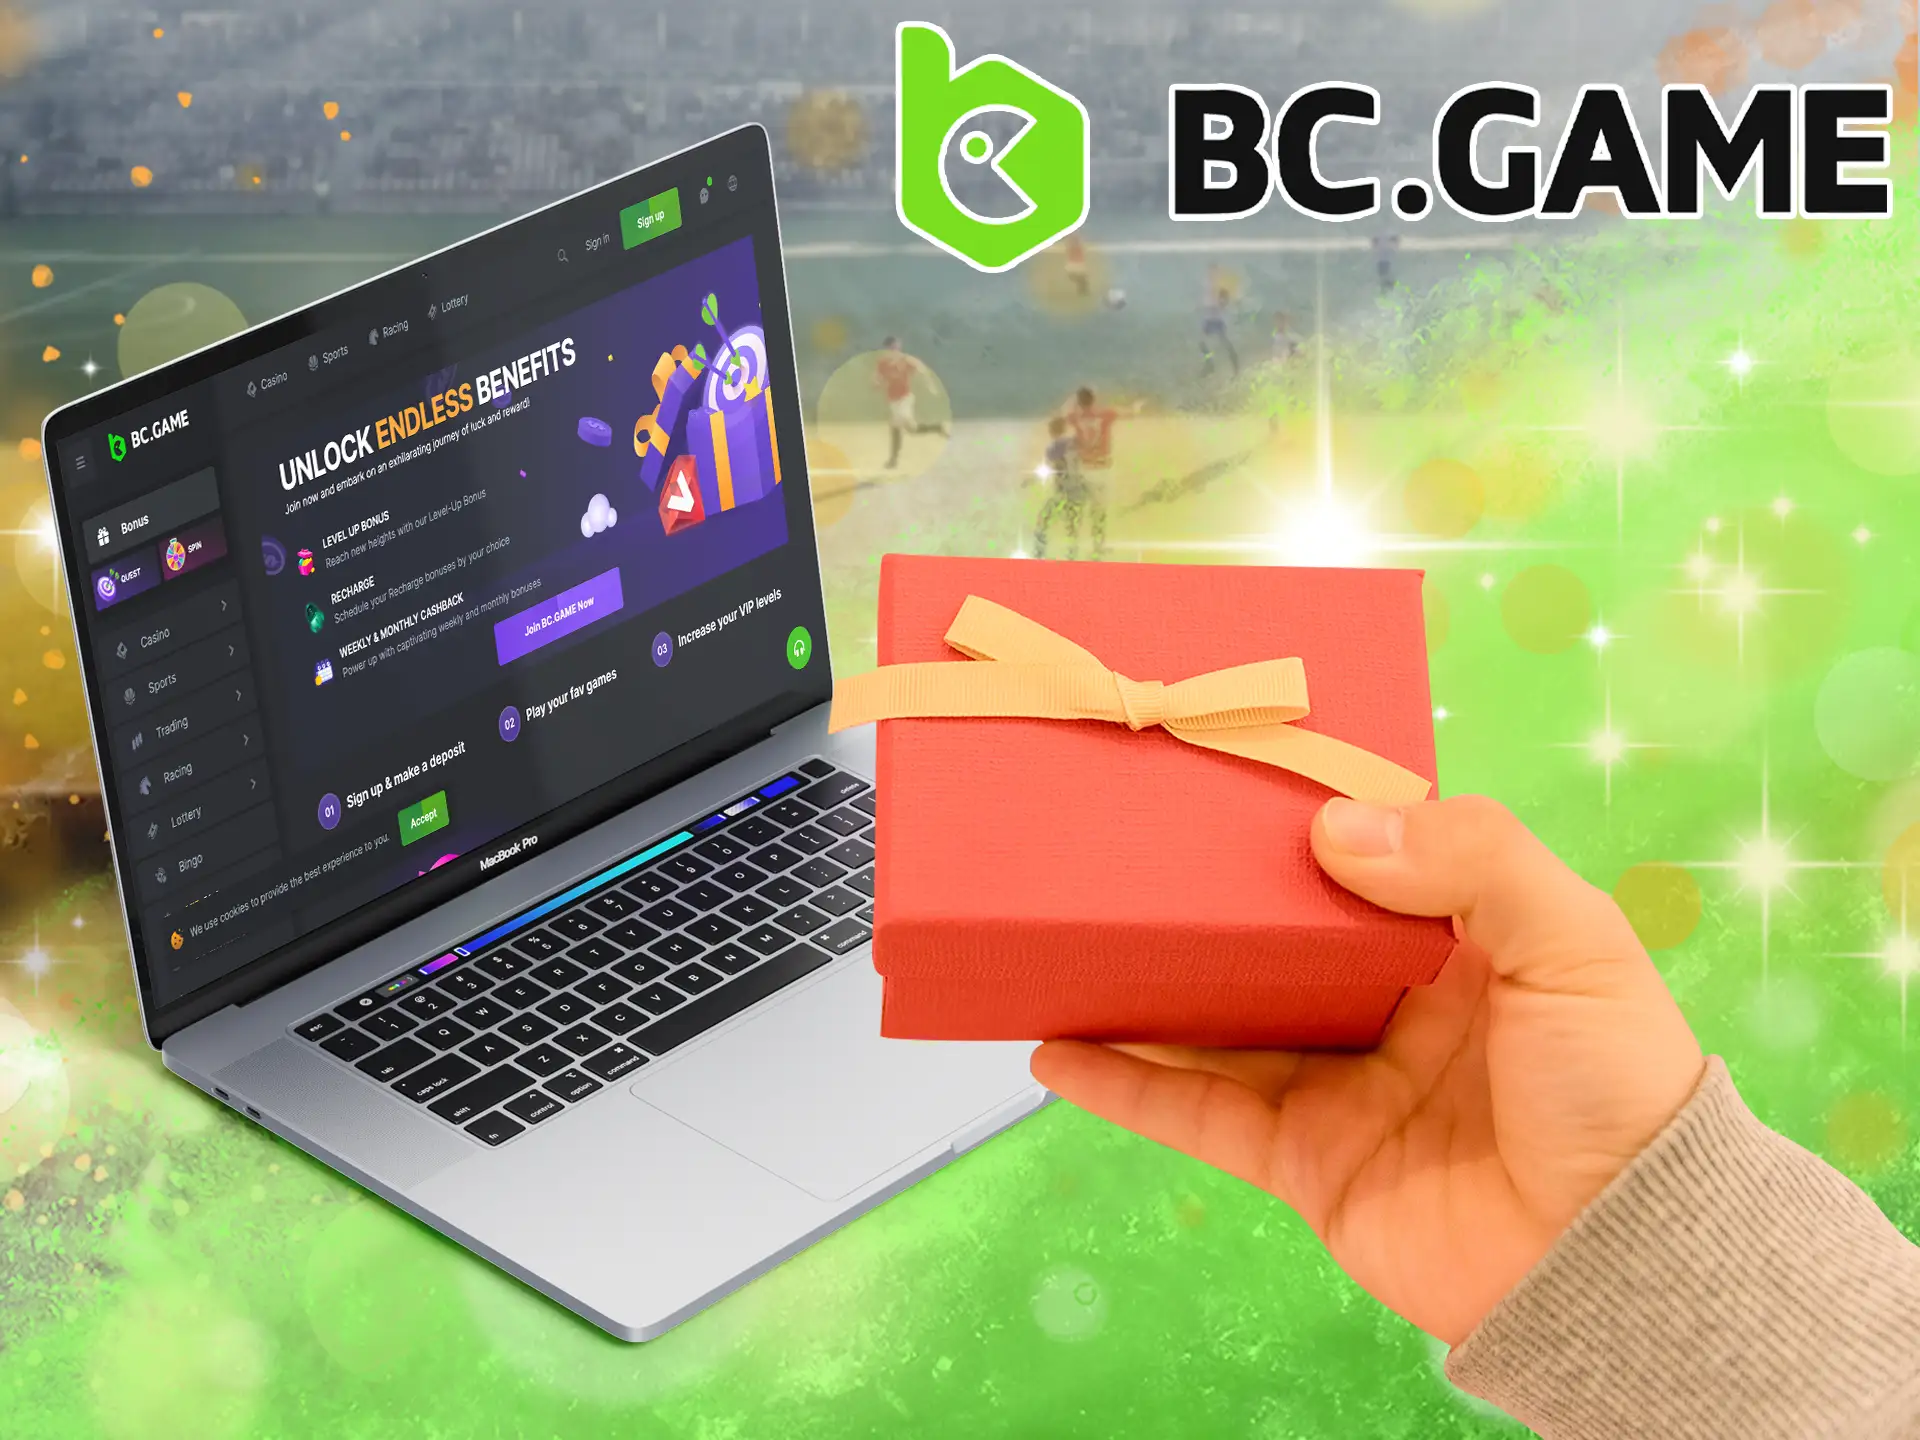 New users will receive a nice compliment from BC GAME for creating an account, it can be used in both casino and sports betting.